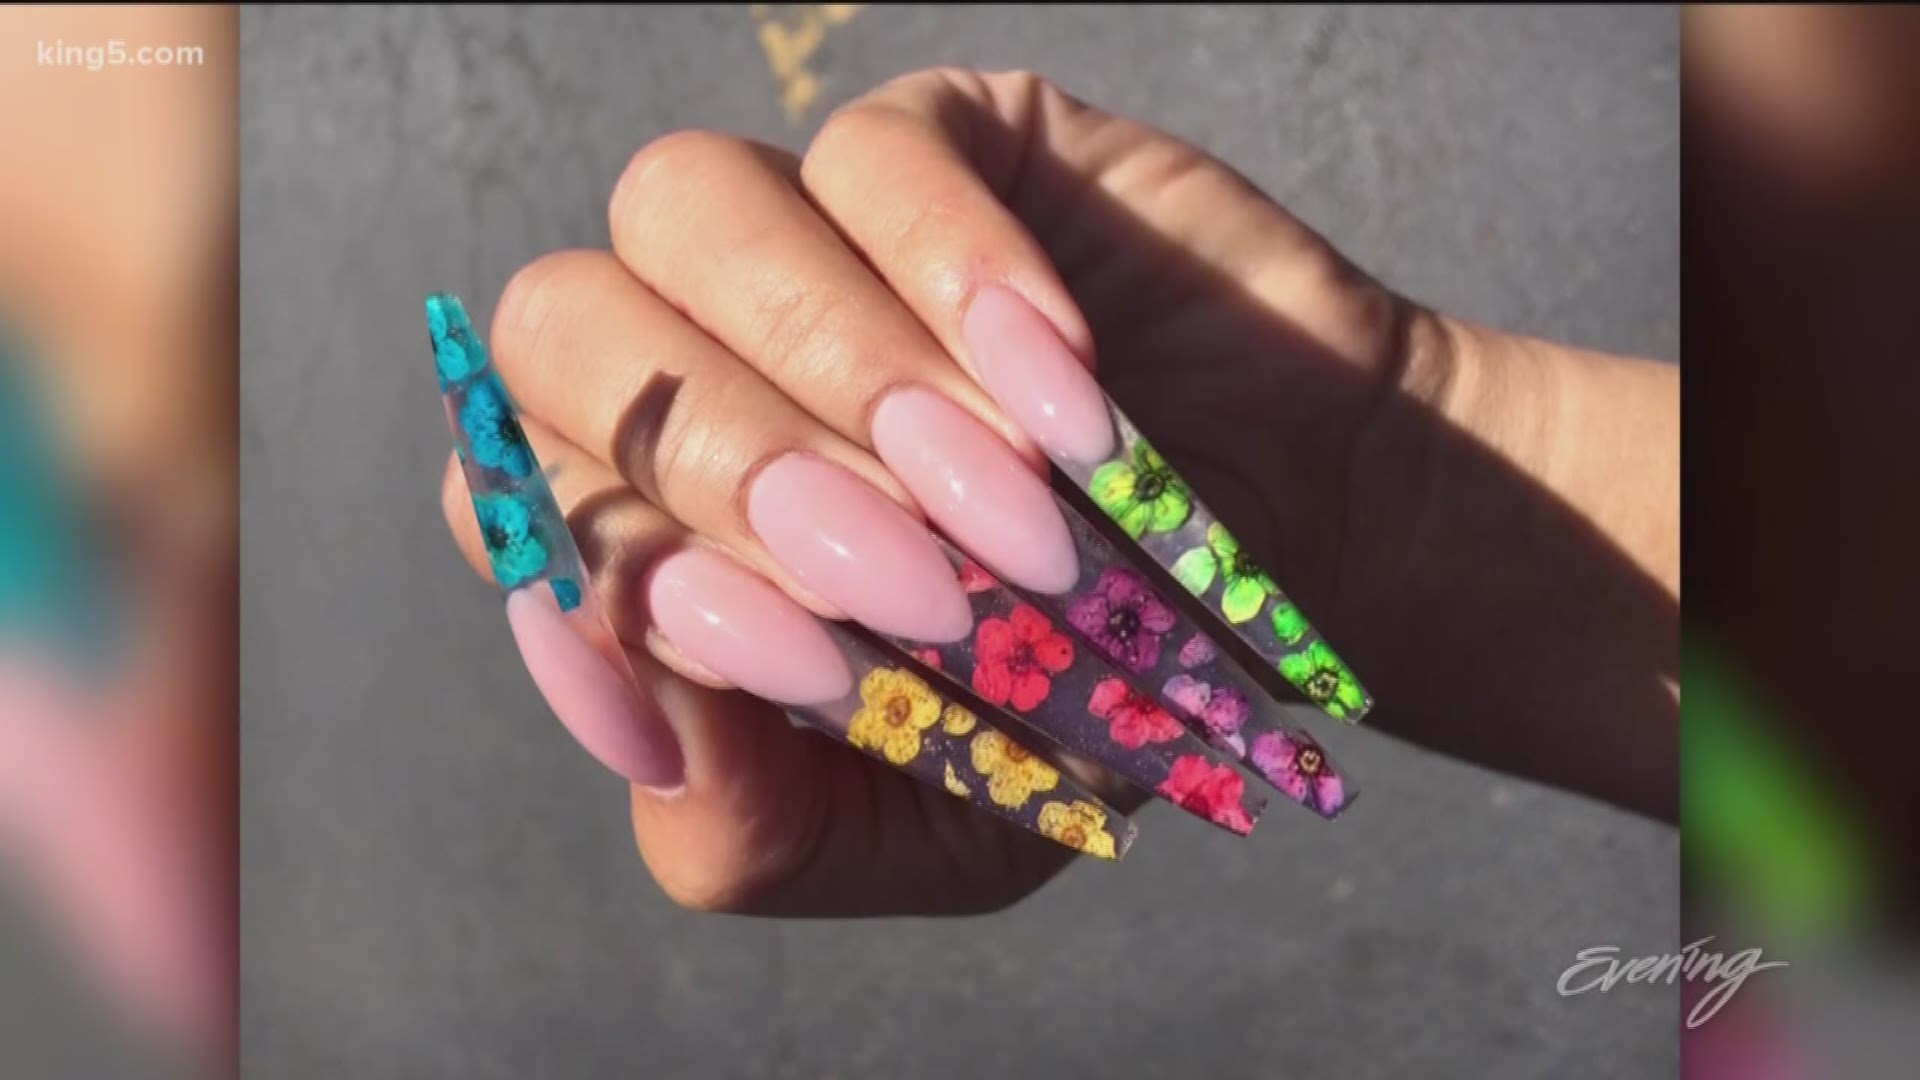 Peka Grayson is a nail artist ... literally. She creates manicure masterpieces in her West Seattle studio, Impekable Nails